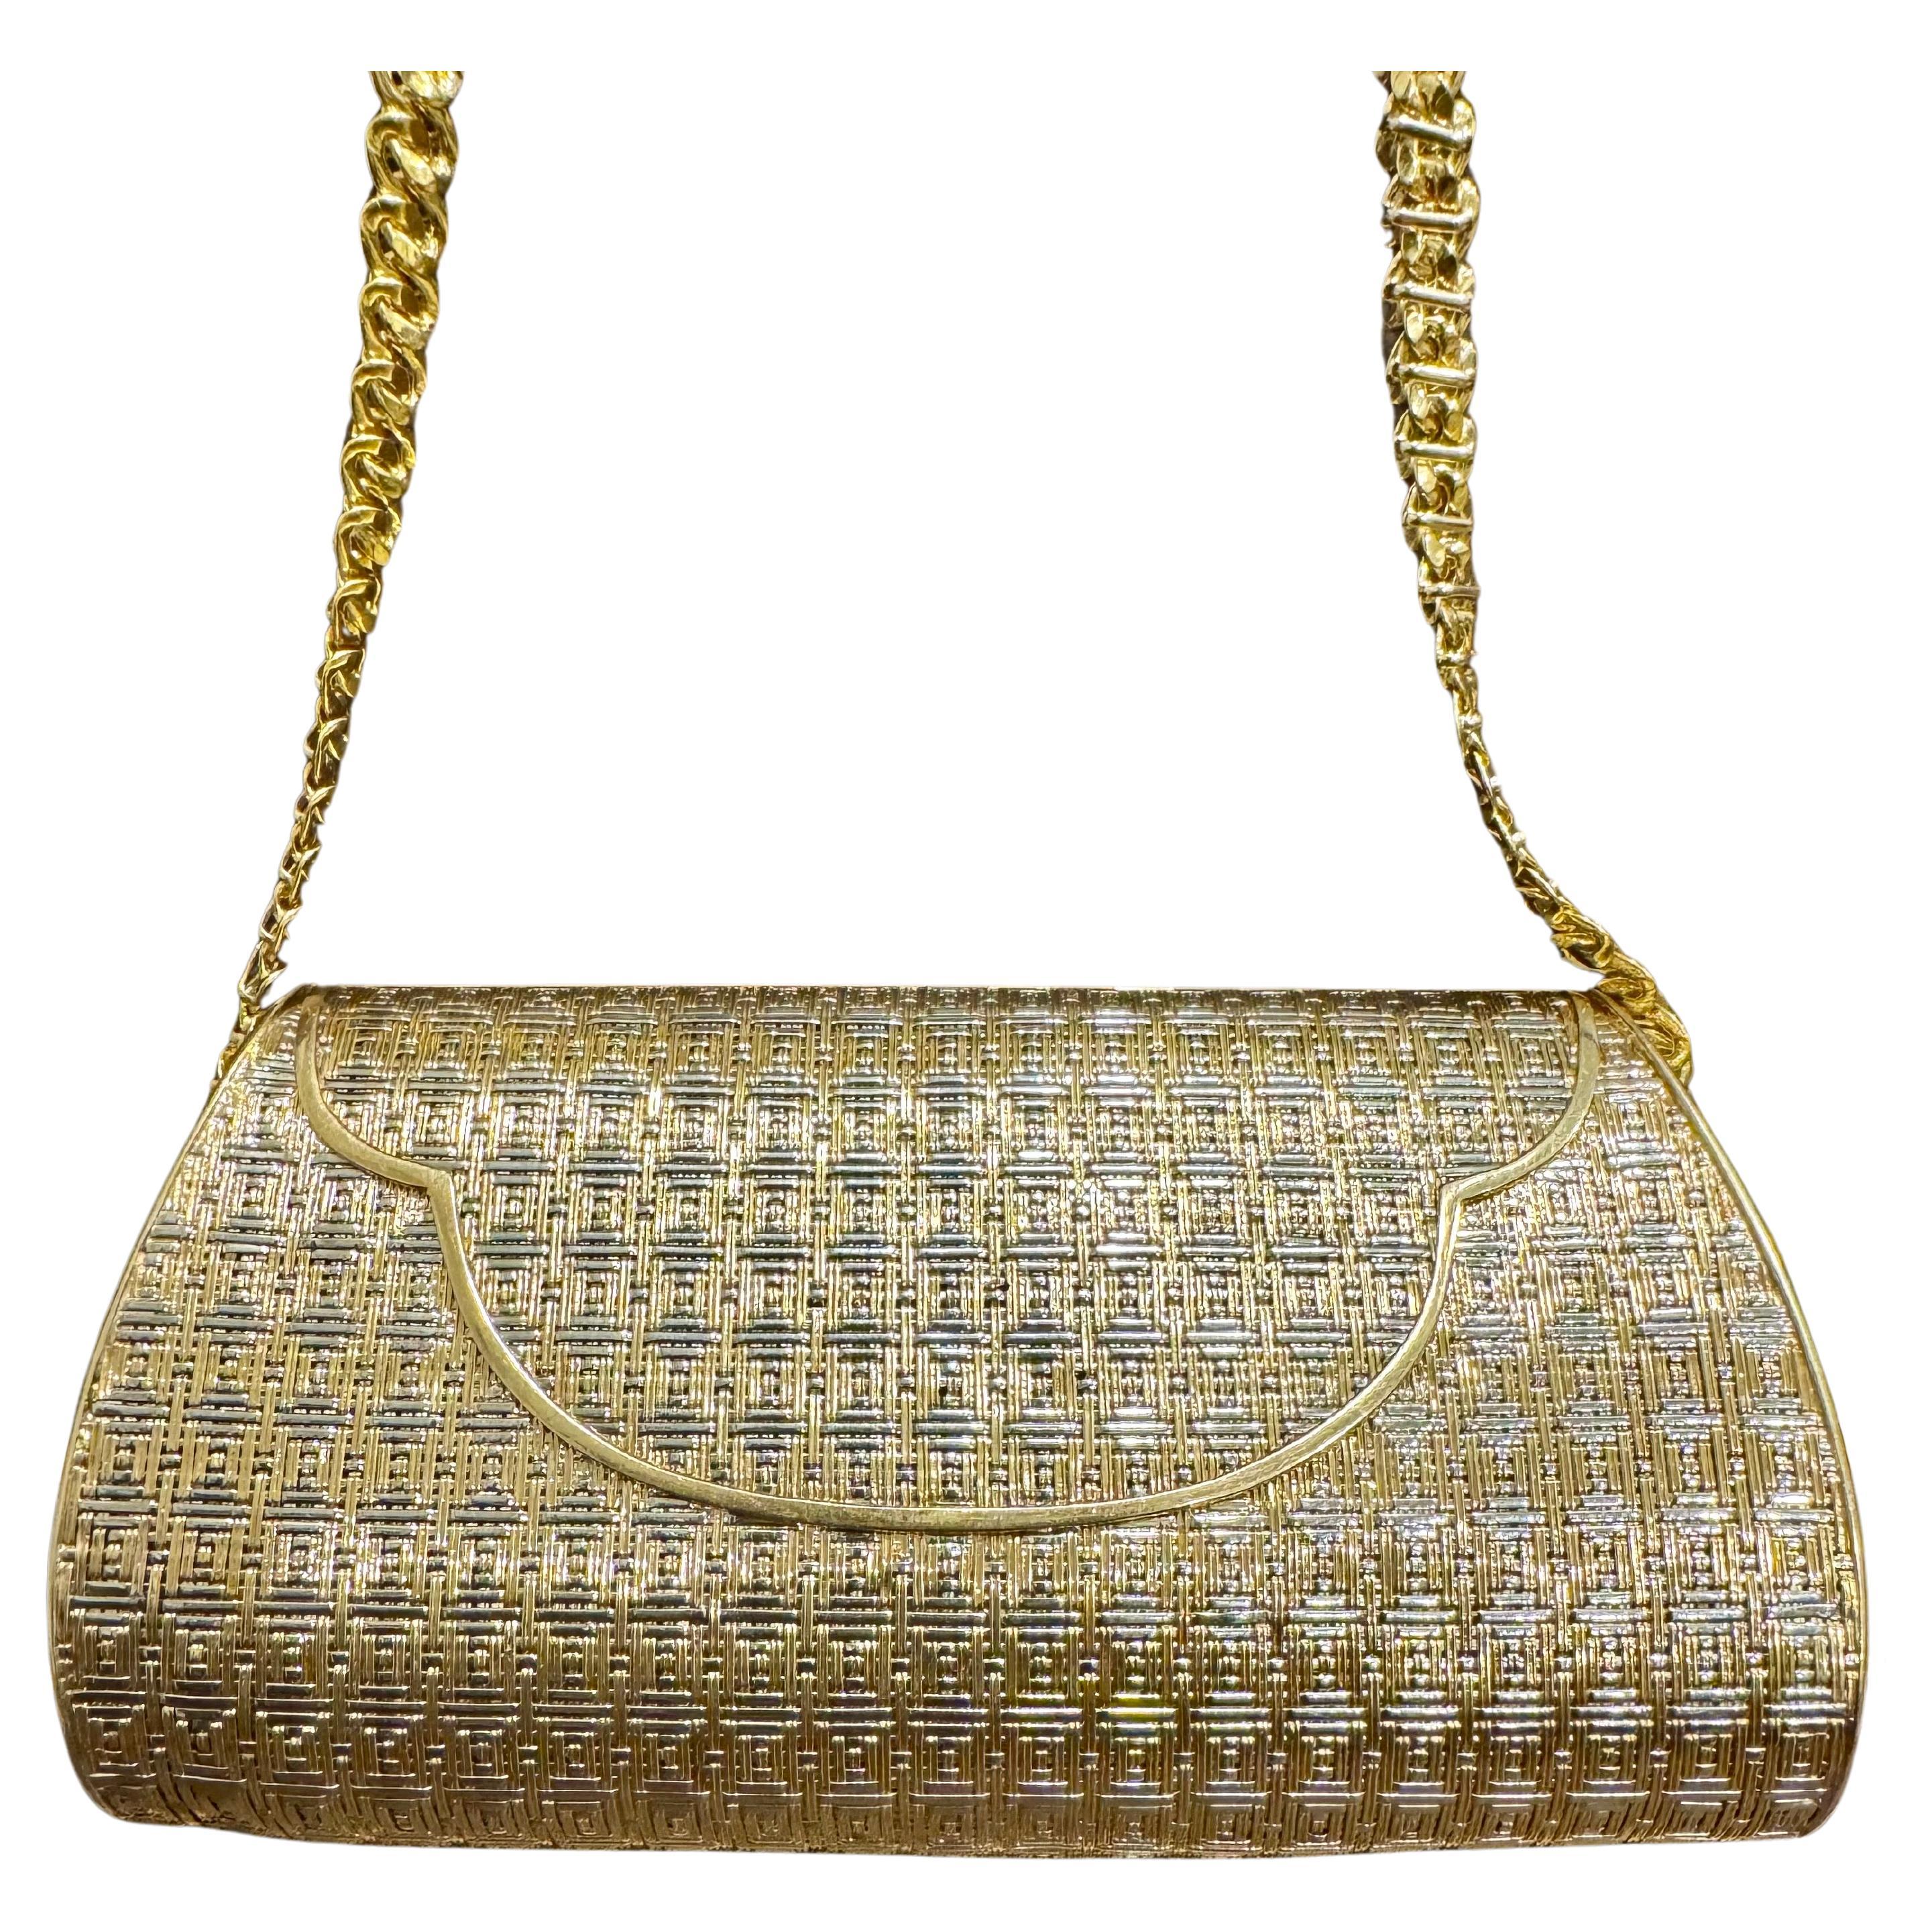 STUNNING AND RARE! 
This exquisite Vintage Clutch Purse from the 1960s was designed with a soft textured woven style,  
Meticulously crafted 18 karat yellow gold mesh clutch. A former First Lady had one custom made with diamonds! VCA is known